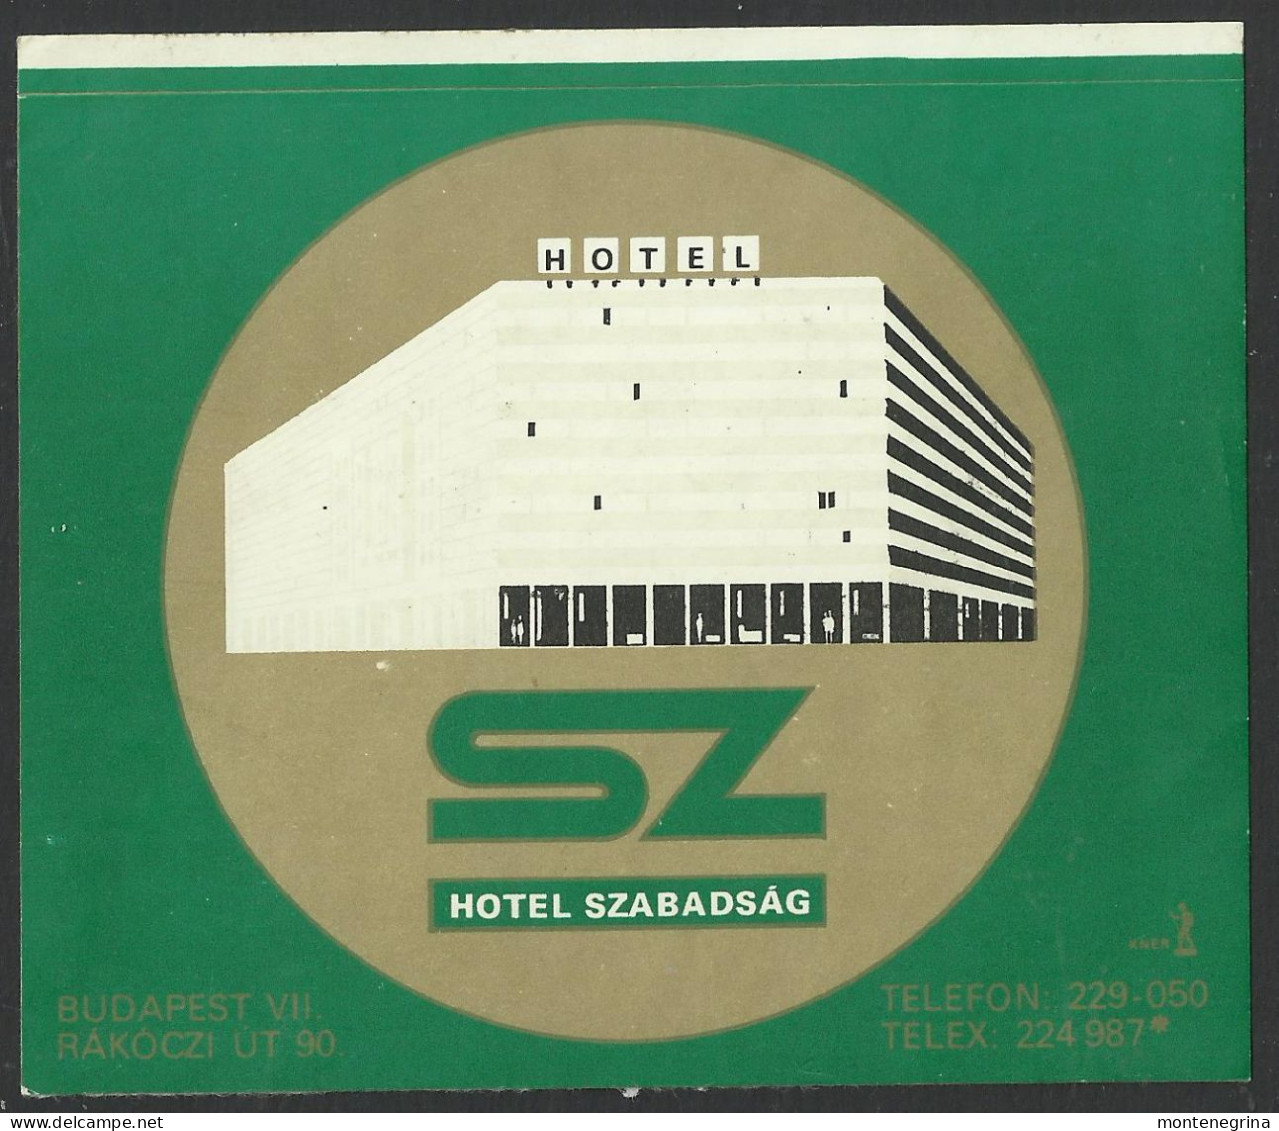 HUNGARY - BUDAMPEST - Hotel, SZABADSAG Luggage Label - 10 X 9 Cm (see Sales Conditions) - Hotel Labels